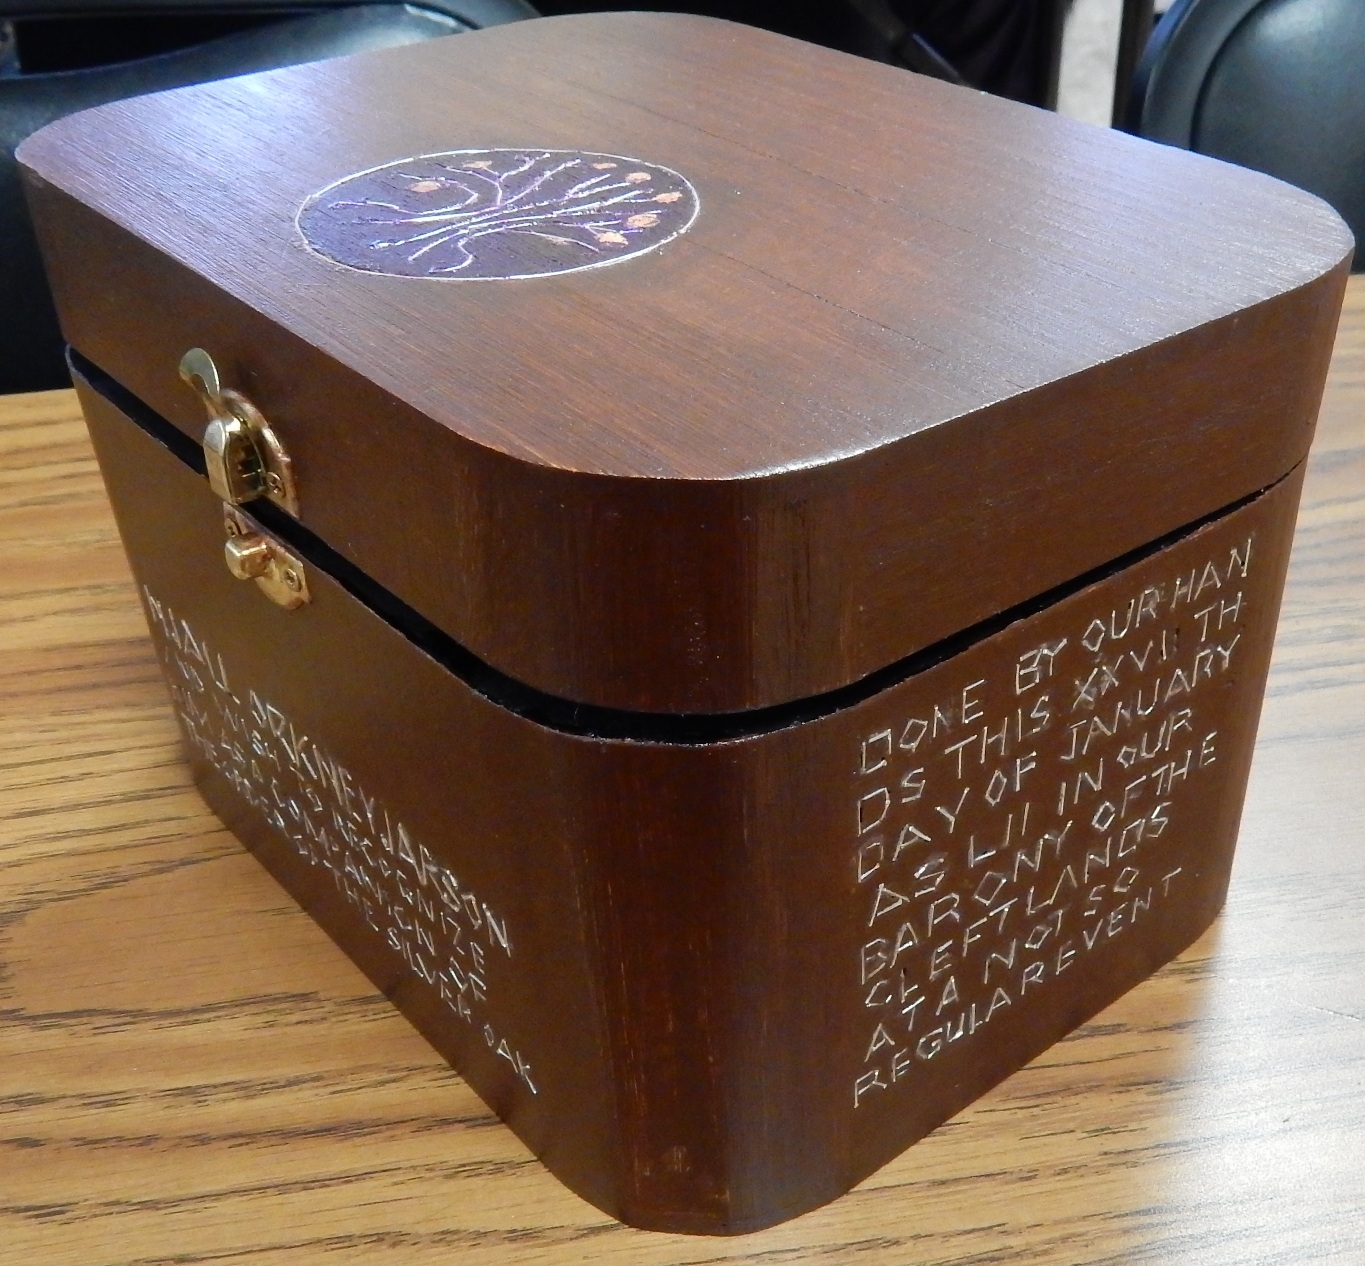 Completed Box with inlaid wire decoration.